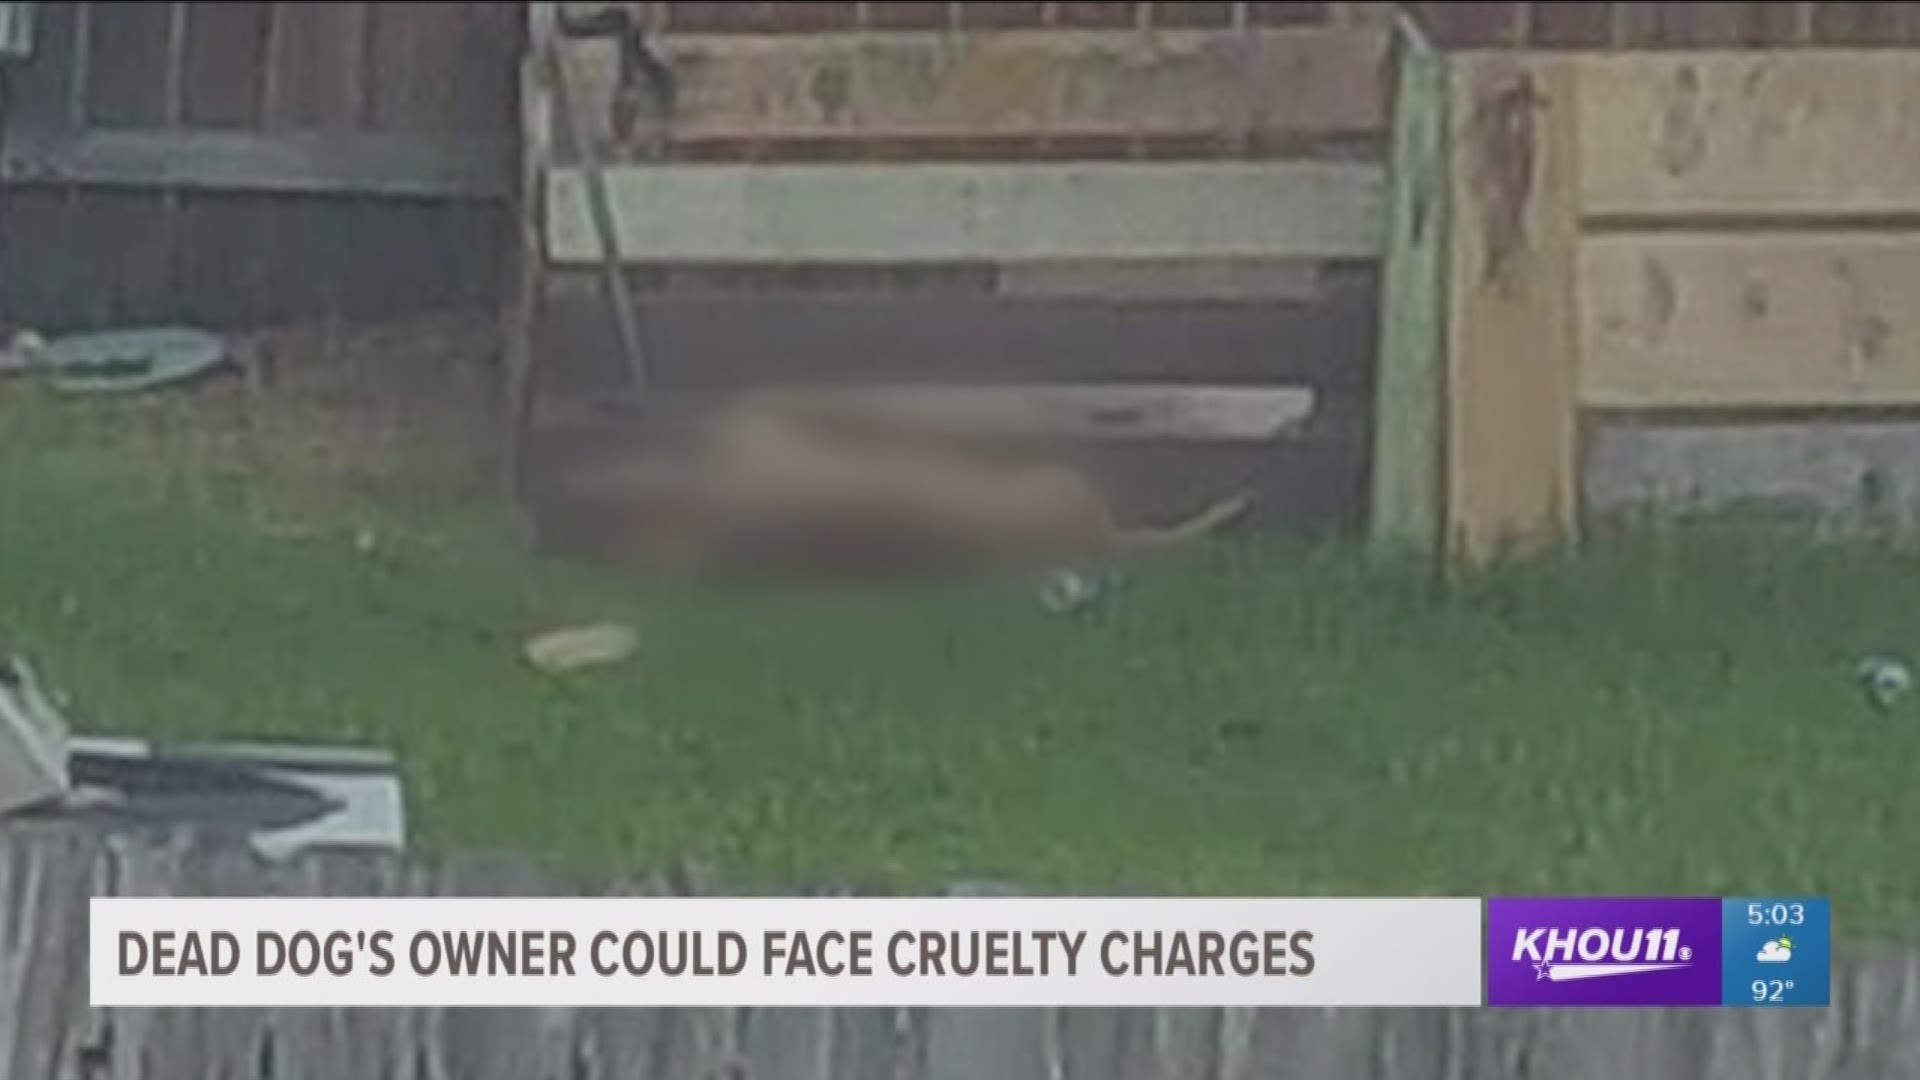 The owner of a dog found dead in the backyard of a home could face animal cruelty charges.